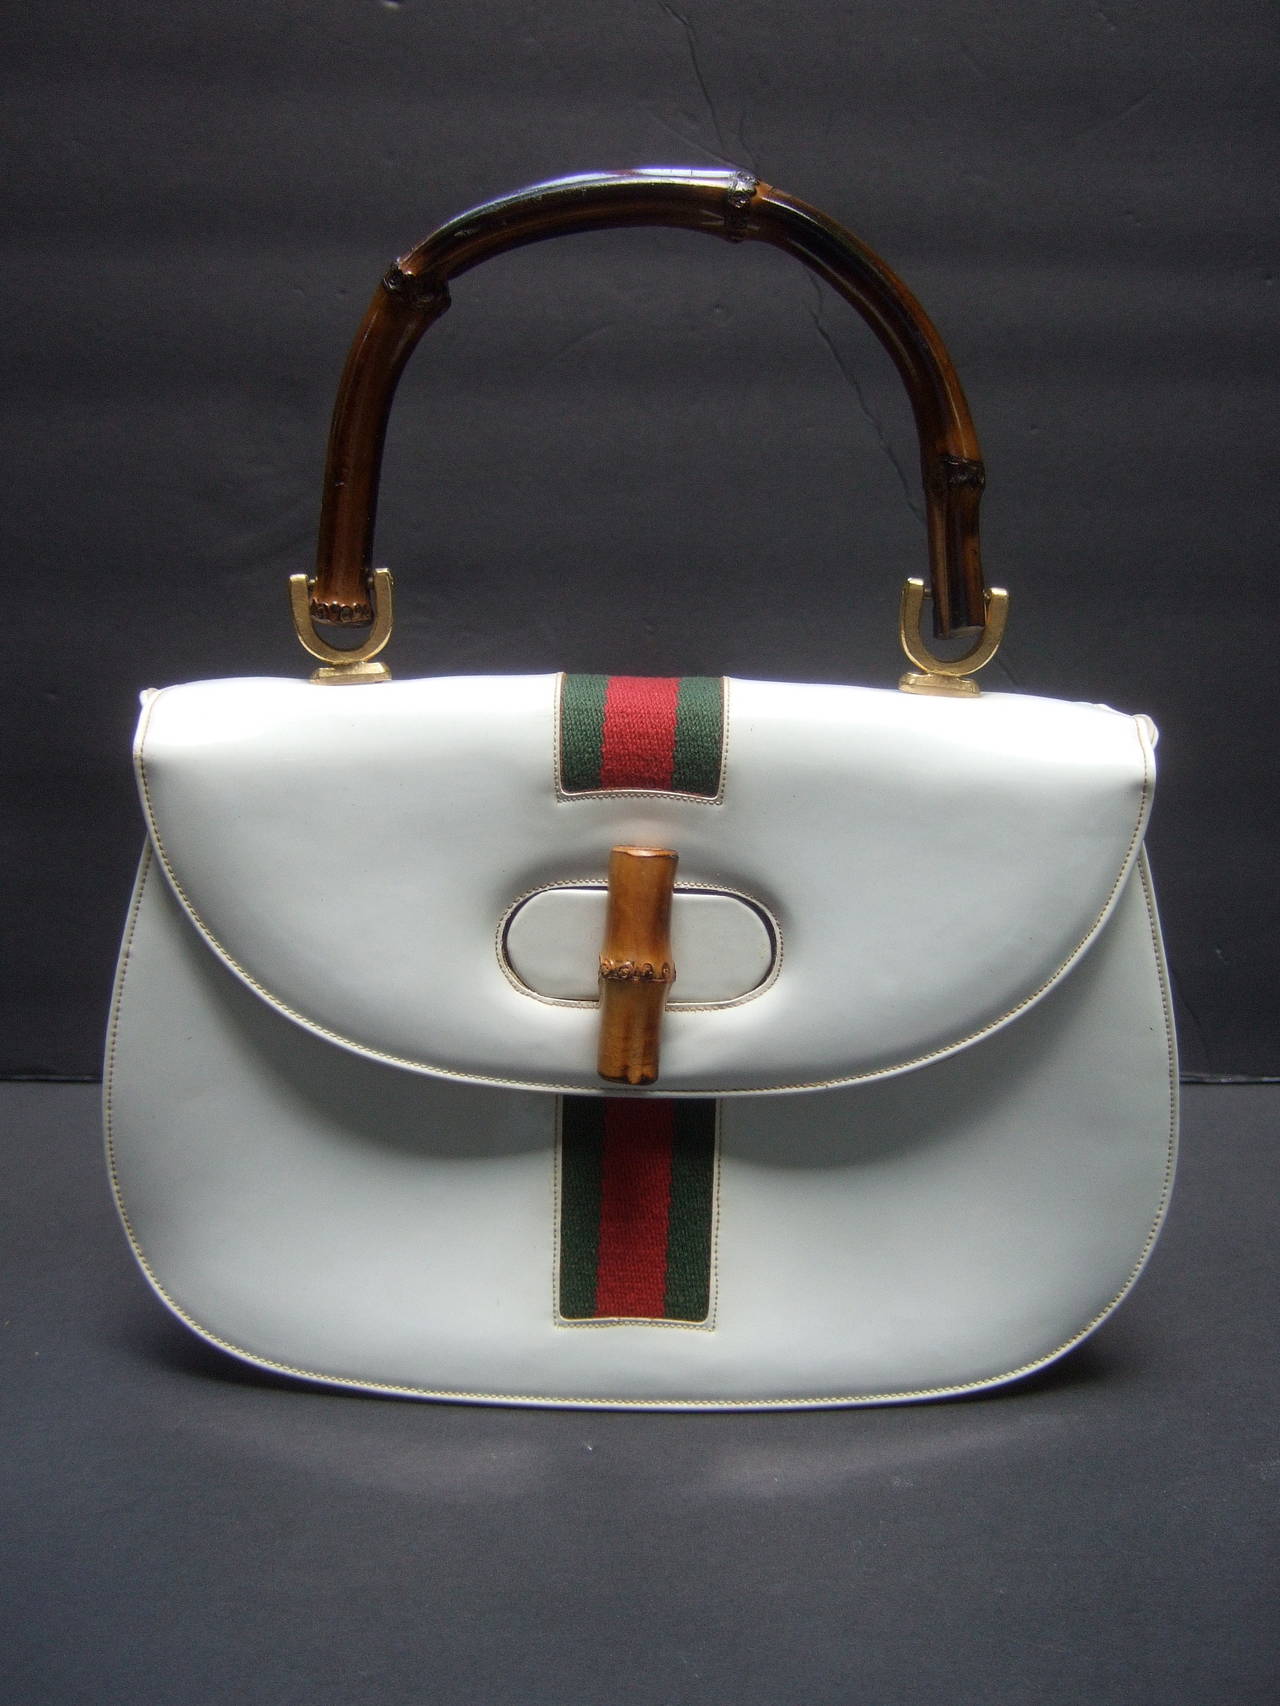 Saks Fifth Avenue White patent leather bamboo handle handbag c 1970
The stylish retro handbag is designed with a red & green canvas stripe
The posh handbag is carried with a wood bamboo handle with a wood
bamboo toggle clasp

The canvas red &